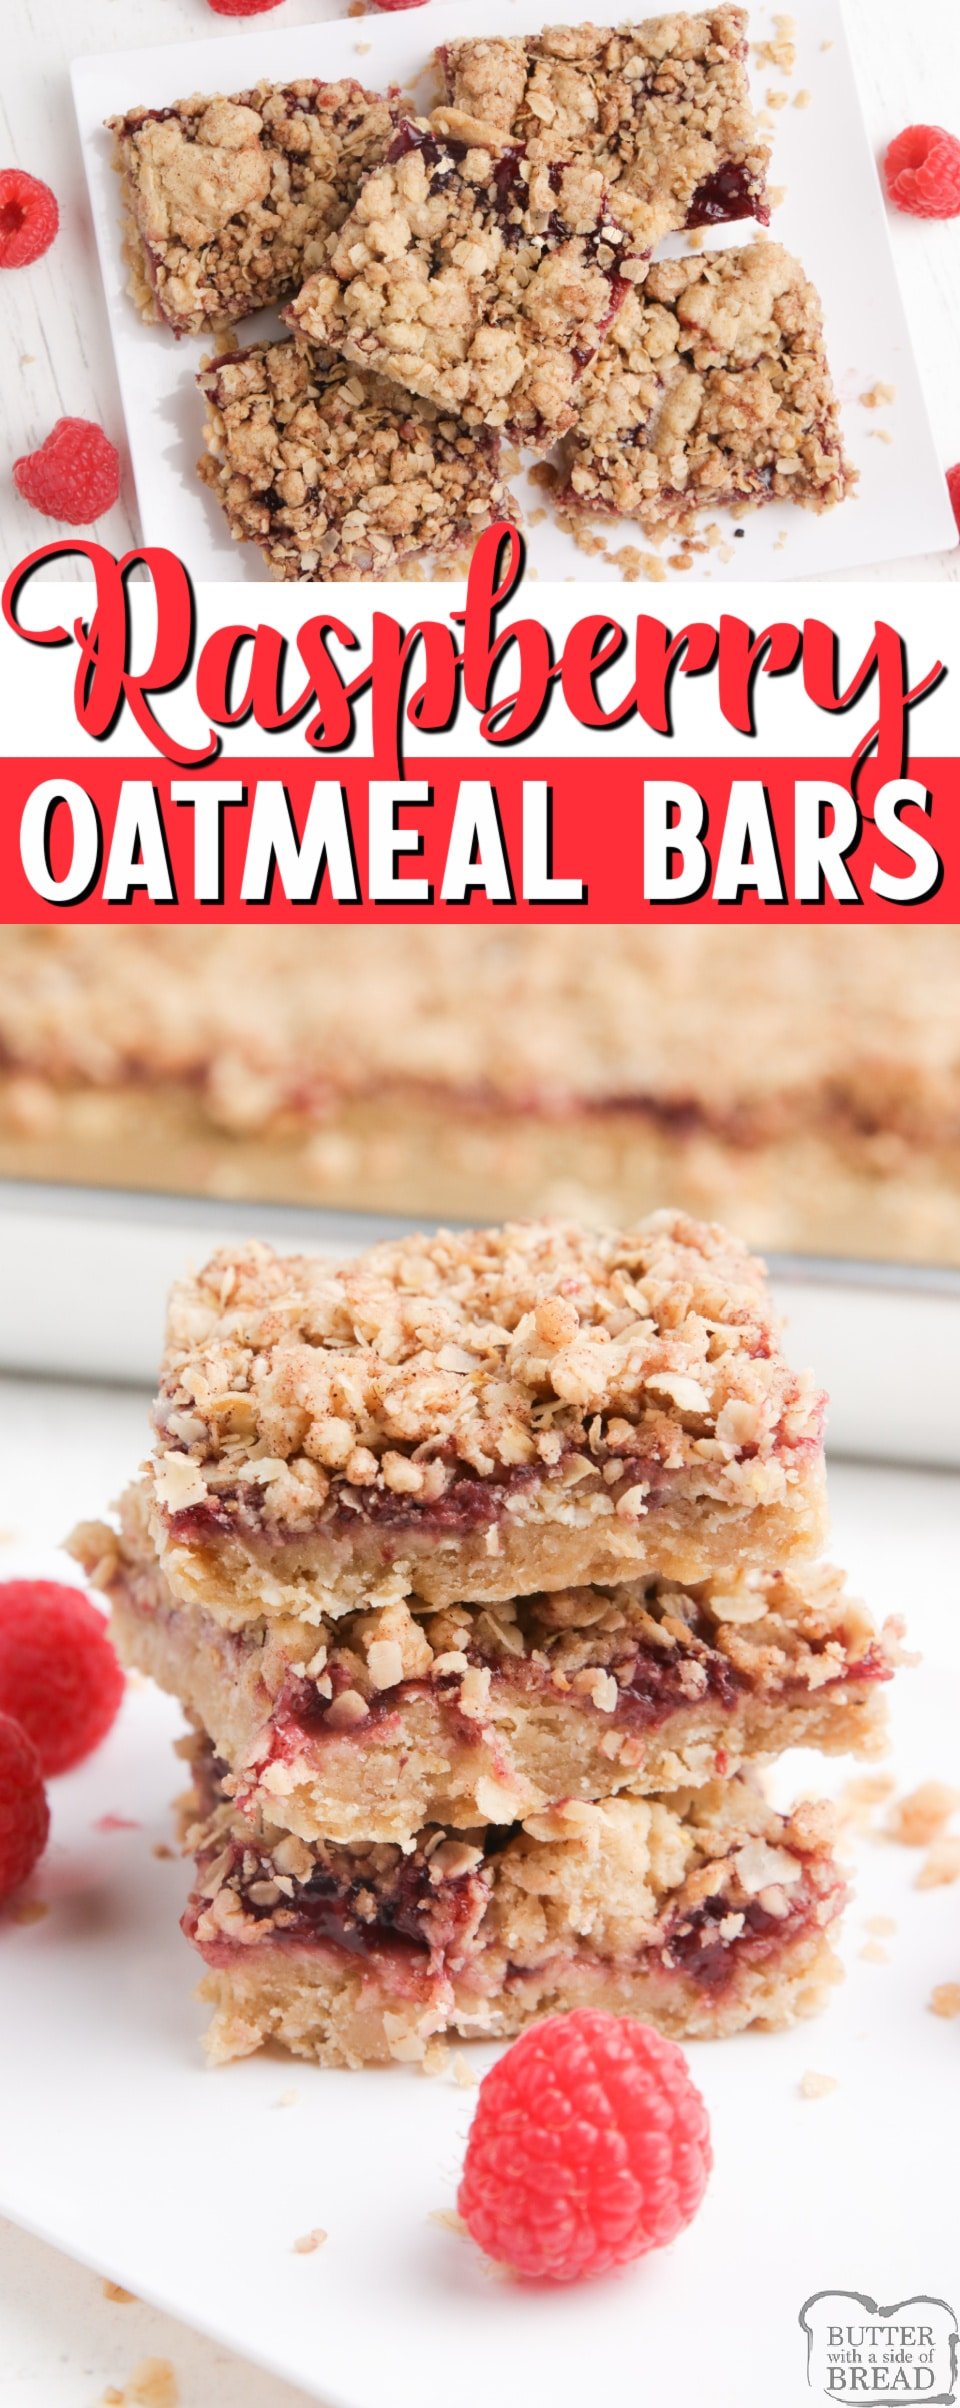 Raspberry Oatmeal Bars made with raspberry pie filling sandwiched between two delicious oatmeal cookie layers. Only 7 ingredients needed for this simple oatmeal bar recipe.